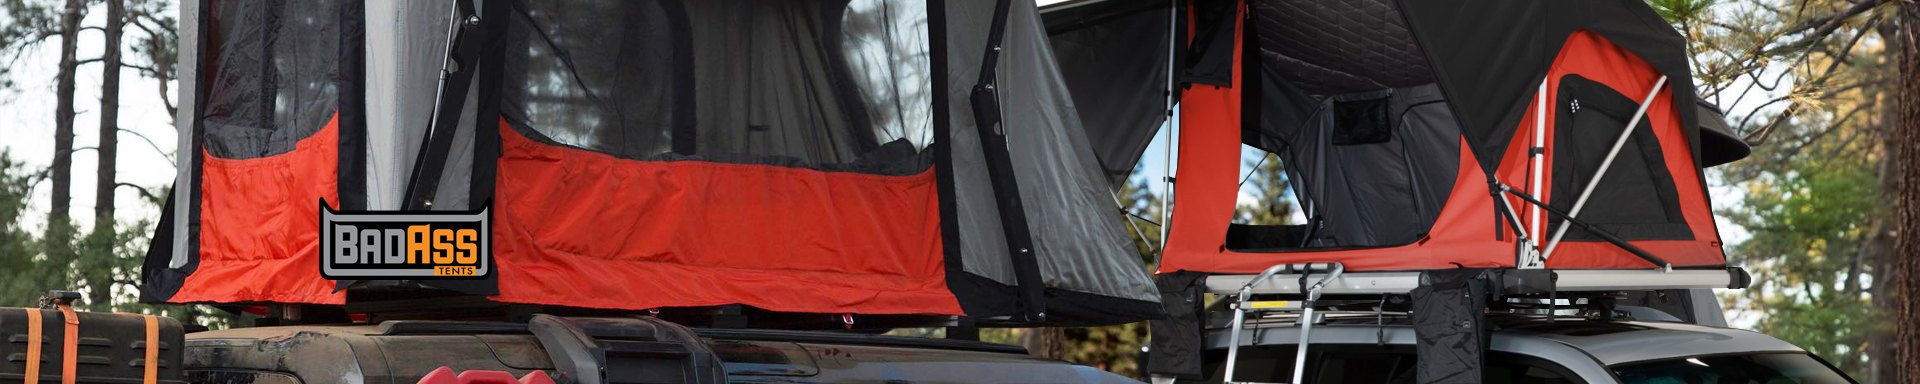 BadAss Tents Spare Tire Covers & Carriers